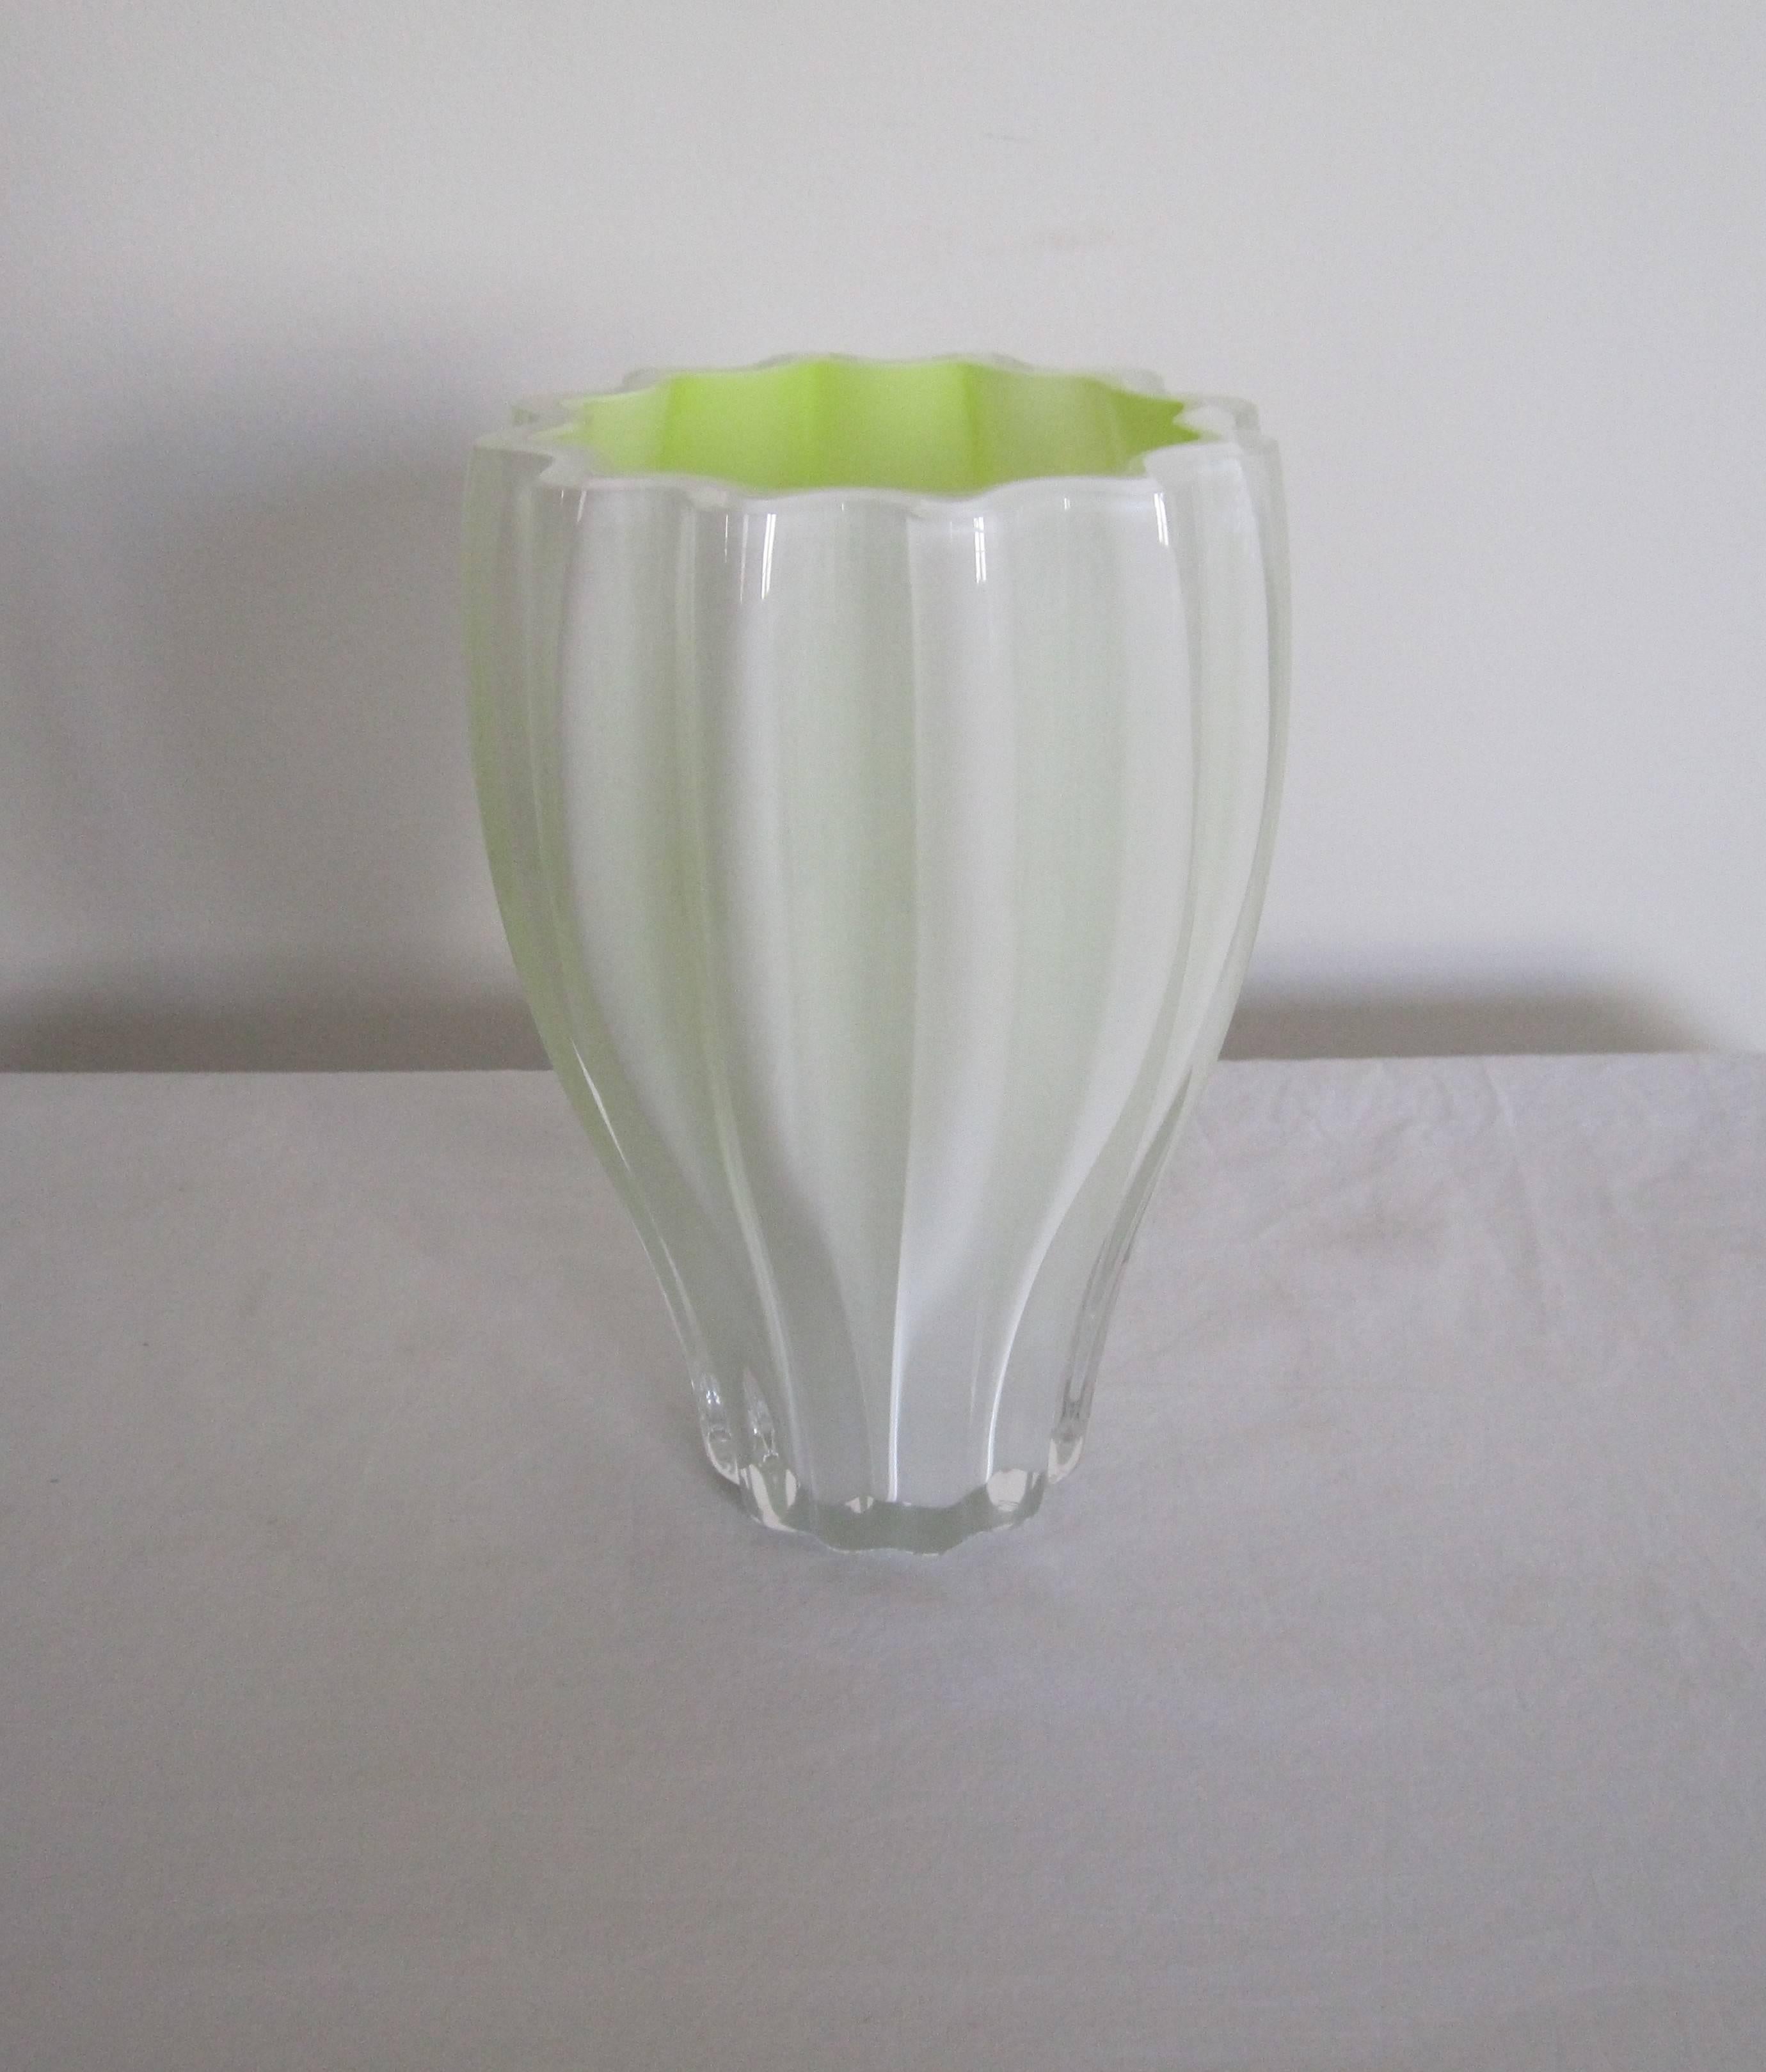 A beautiful Scandinavian Postmodern white and neon/florescent yellow art glass fluted vase from Kosta Boda, Sweden. Vase is numbered, 40015, and signed by artist designer on bottom as show in image #8. Beautiful with or without flowers. Very good